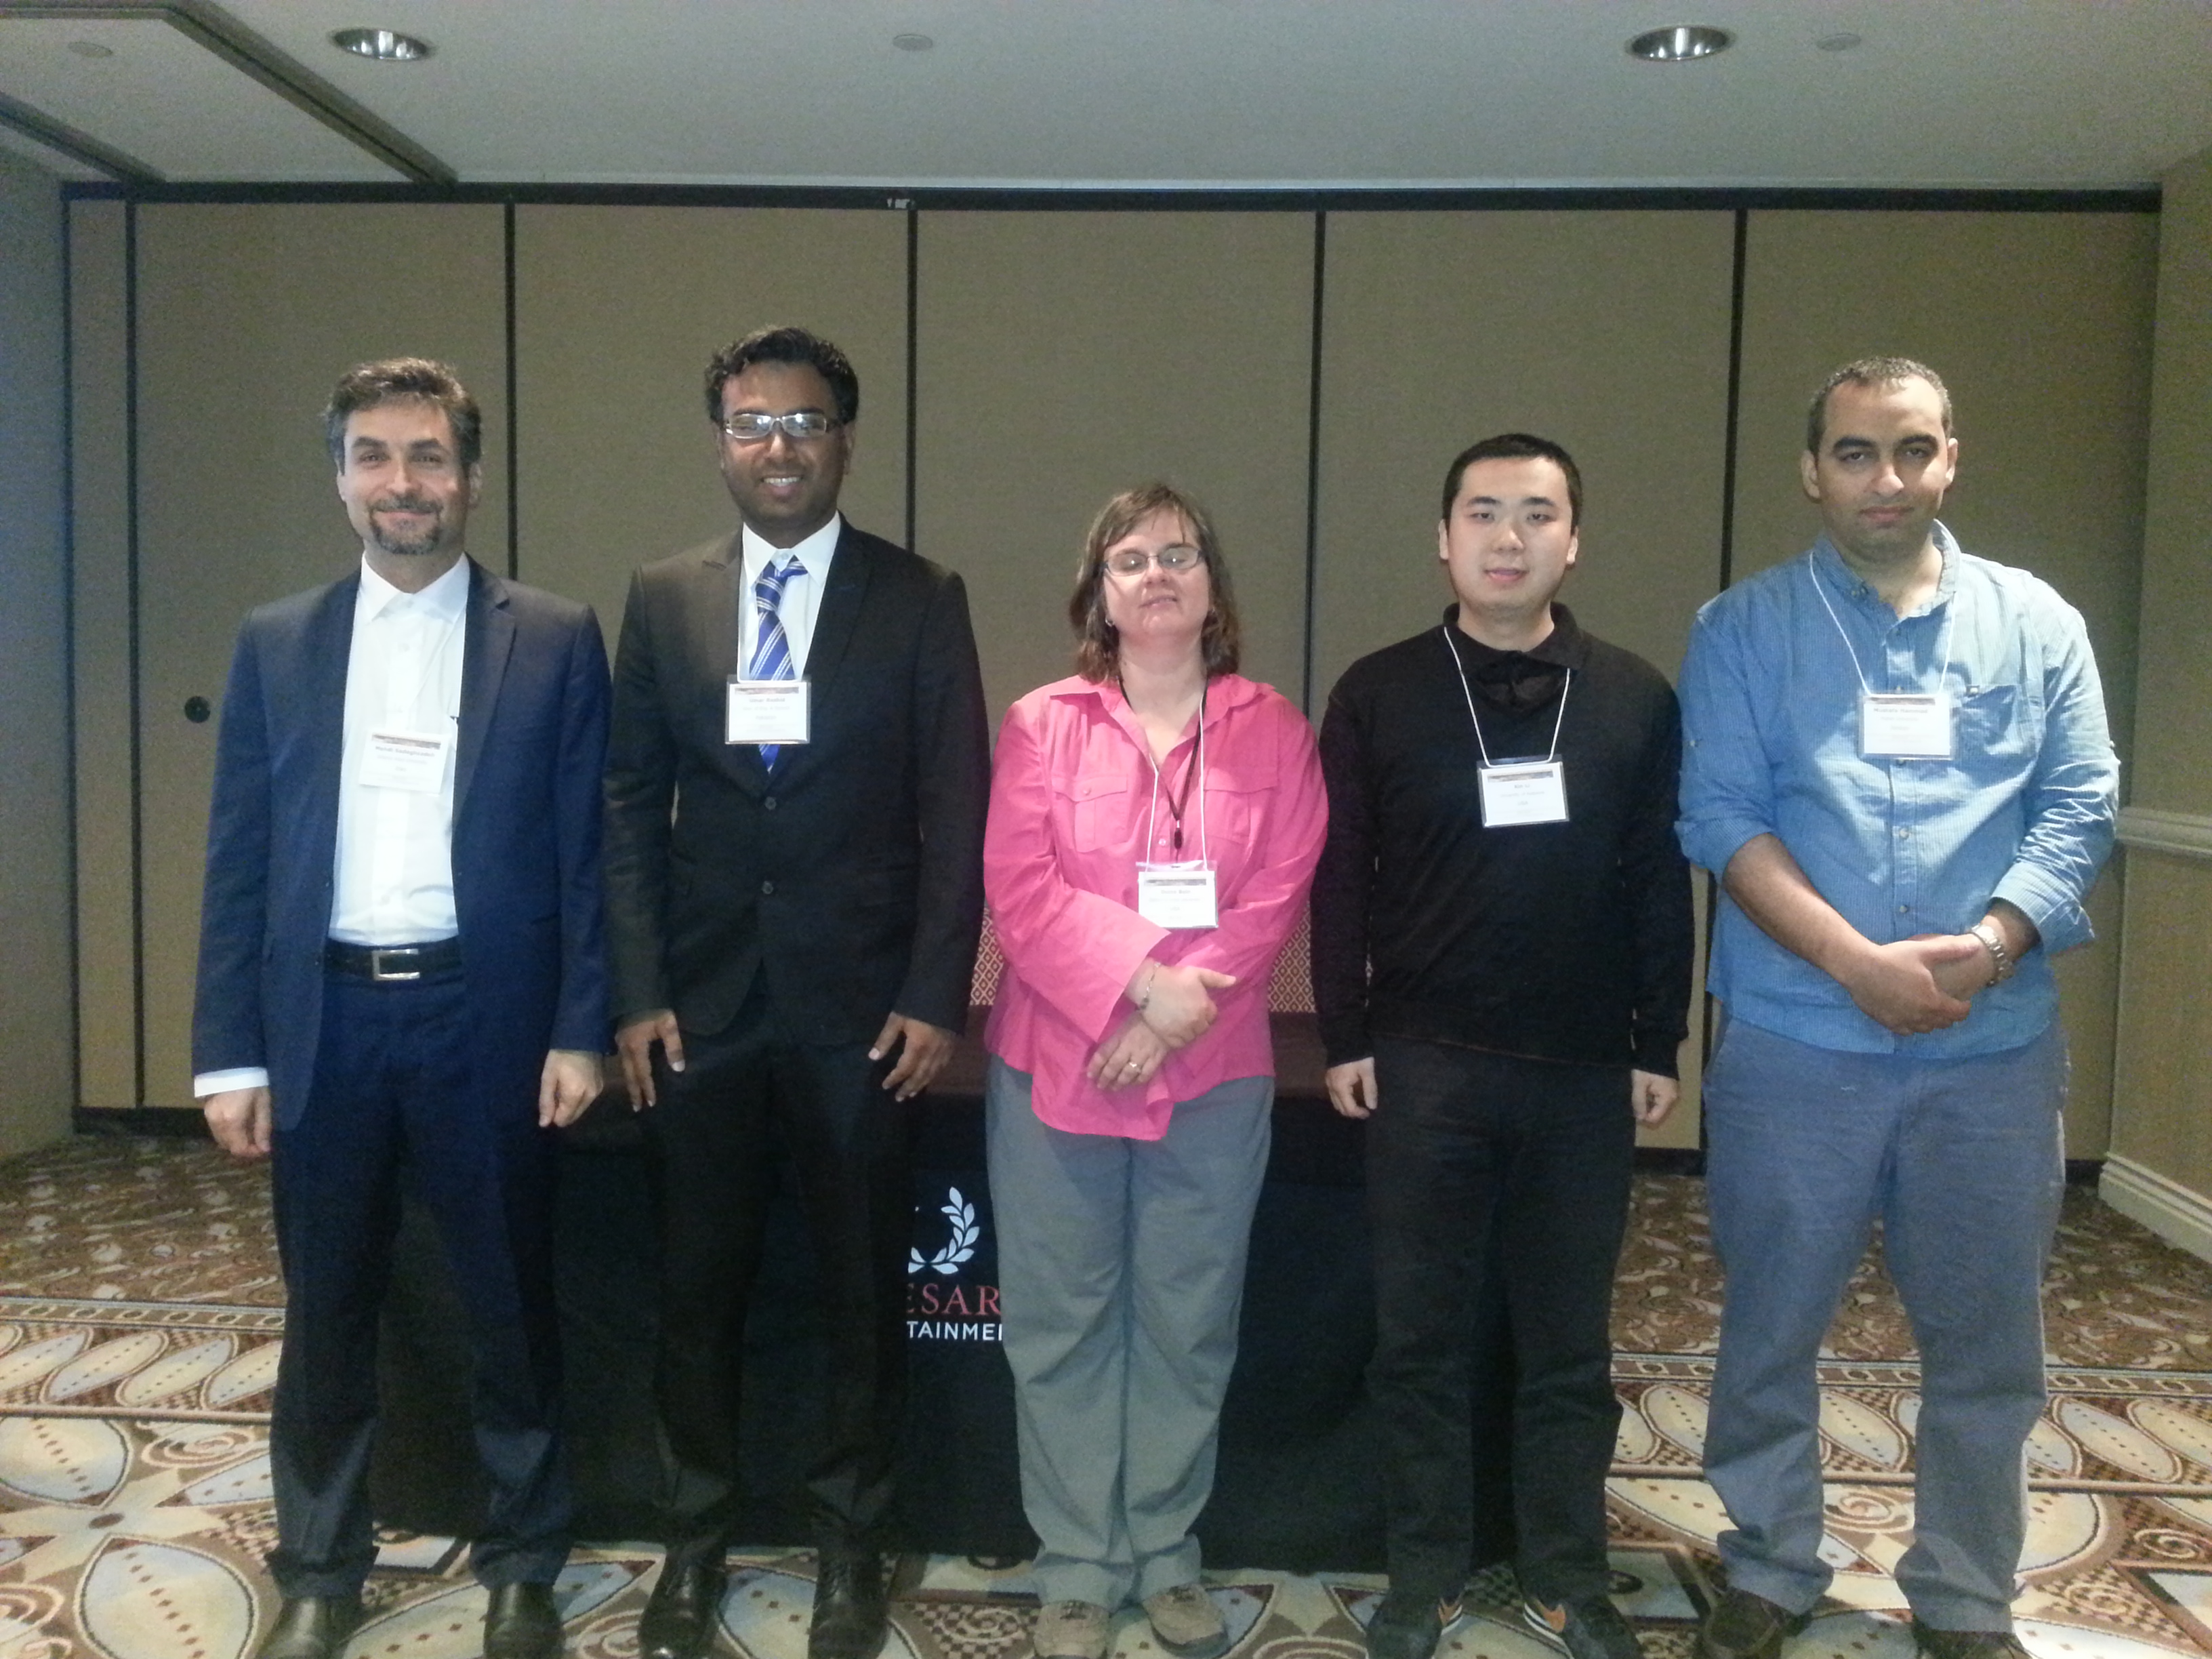 Presenters from my second chaired session